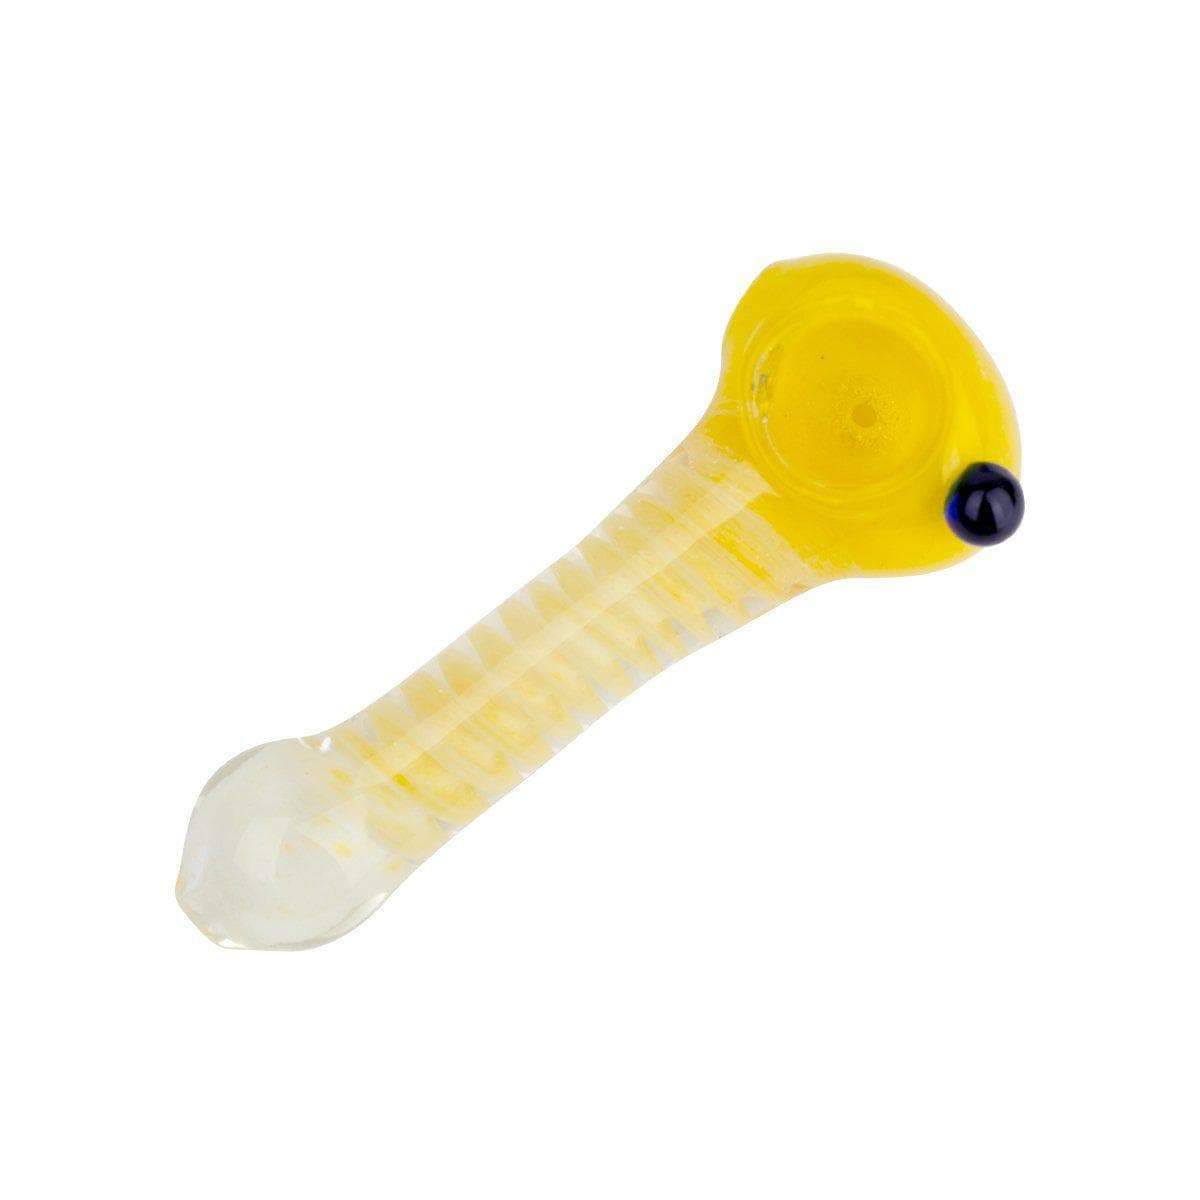 Glass Playground Pipe - 4.5in Yellow and White